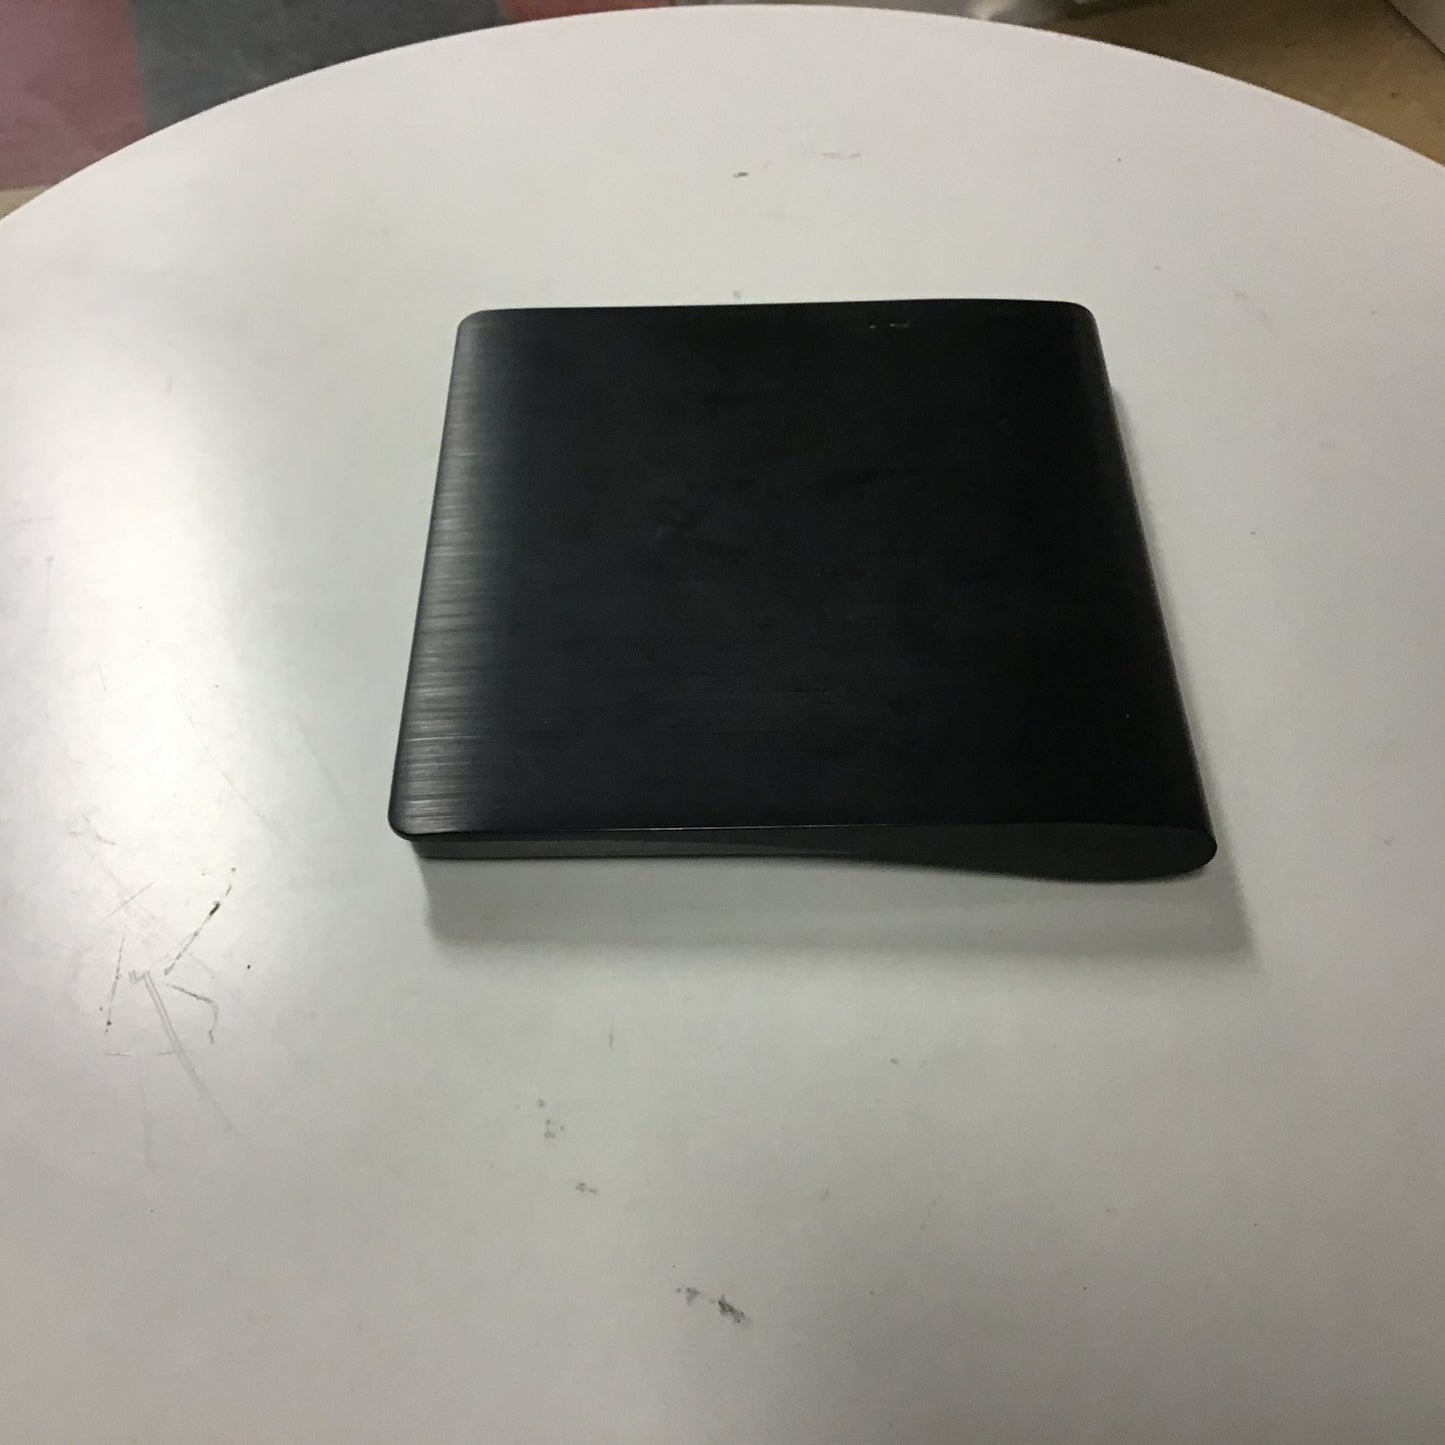 External HDD and ODD